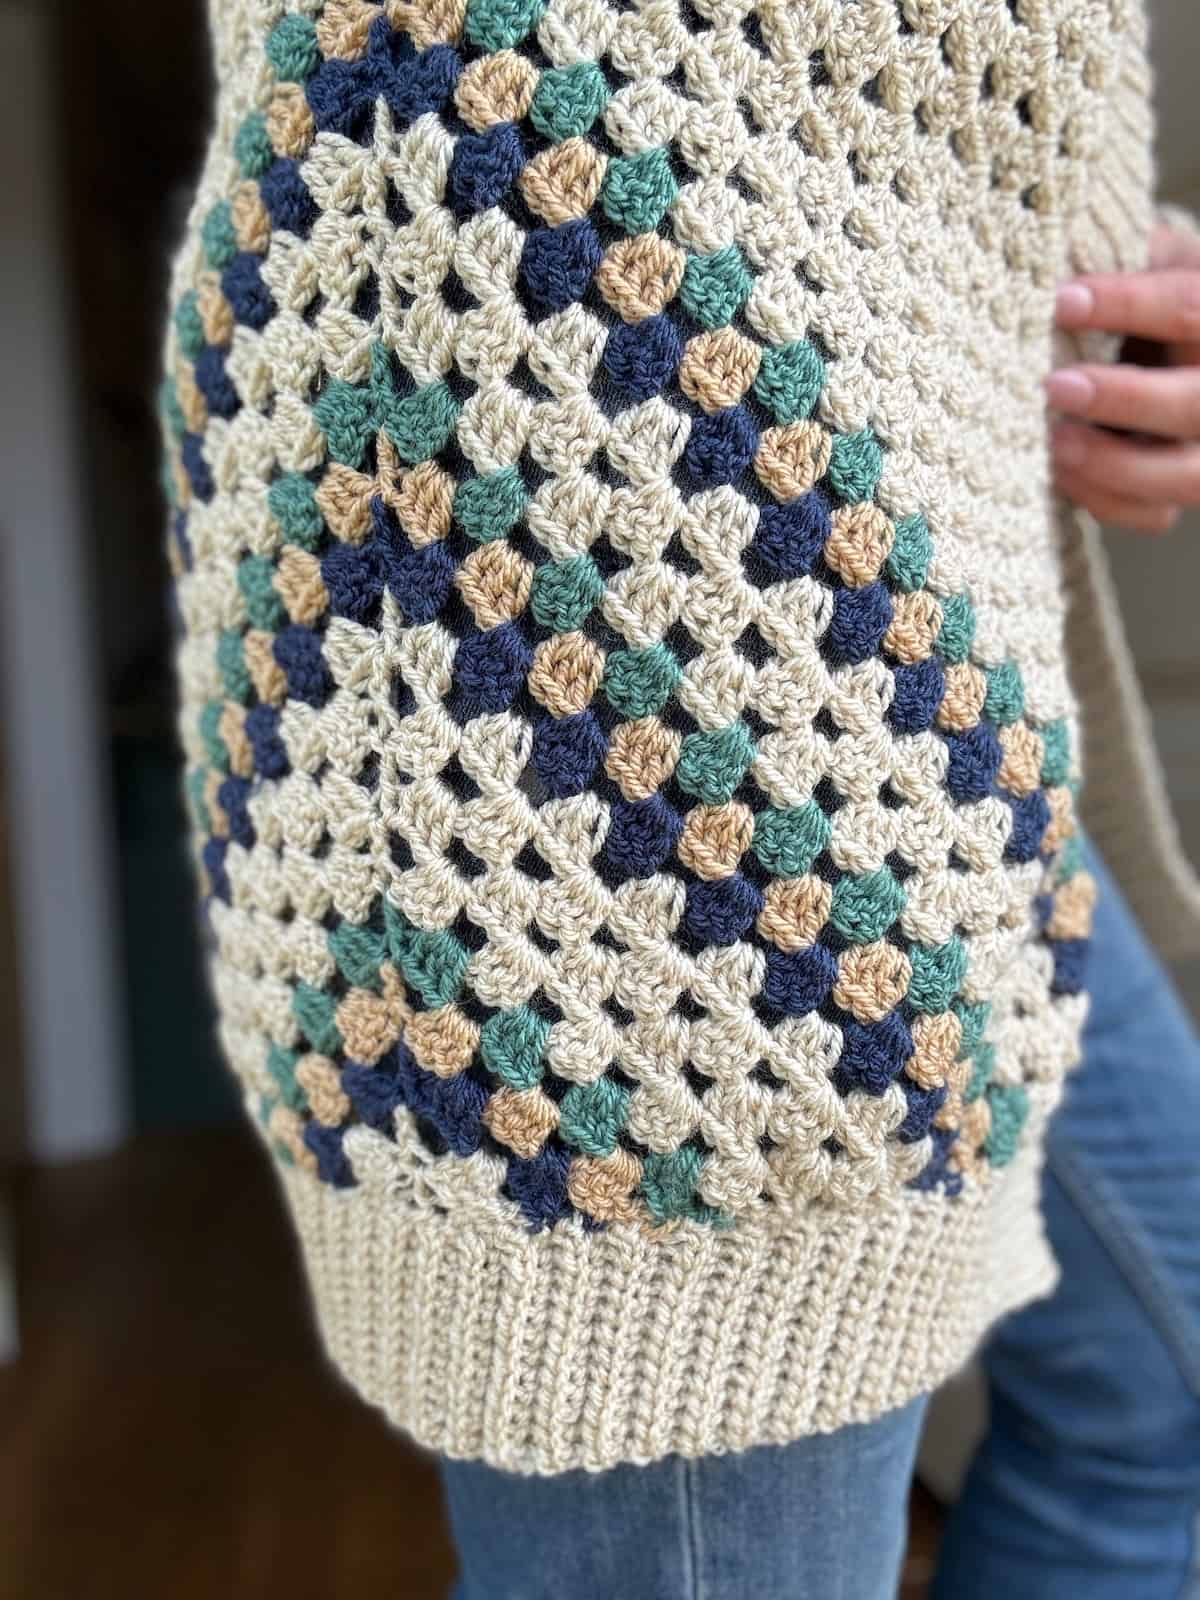 Close-up of a person holding the side of a crochet cardigan in the granny stitch with stripes.